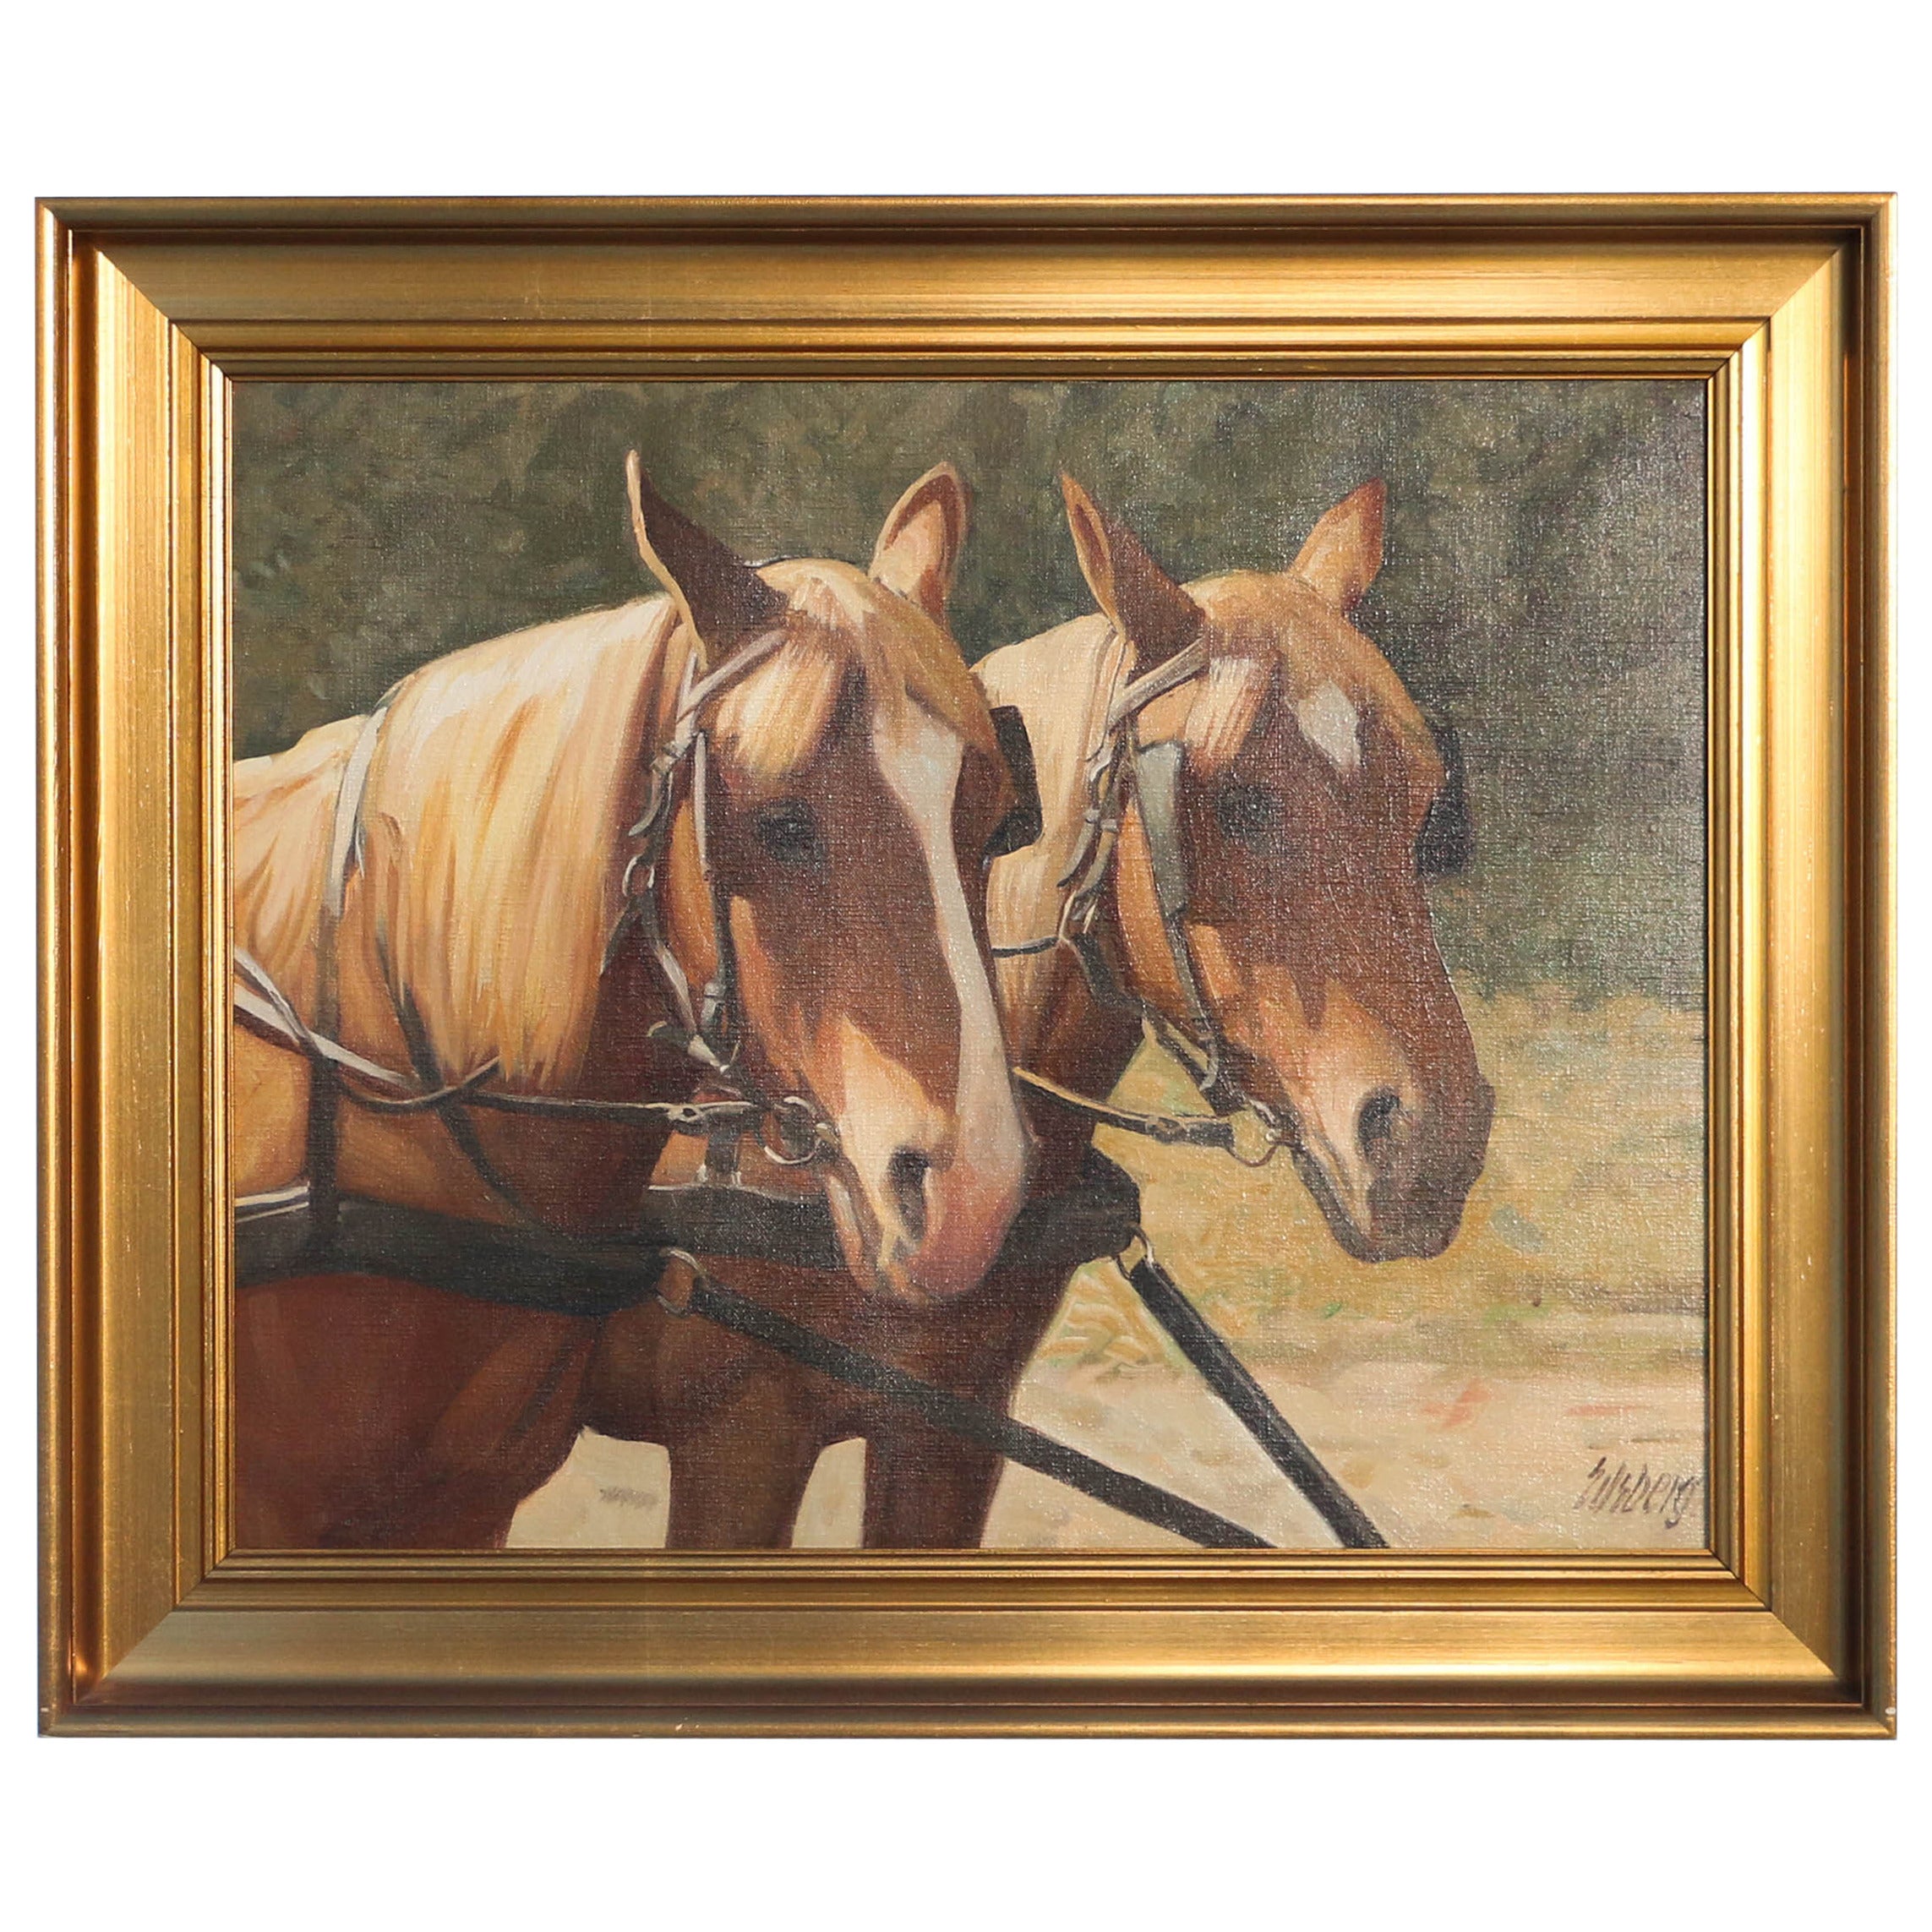 Antique Oil on Canvas Painting of Two Draft Horses, Signed Eilsberg